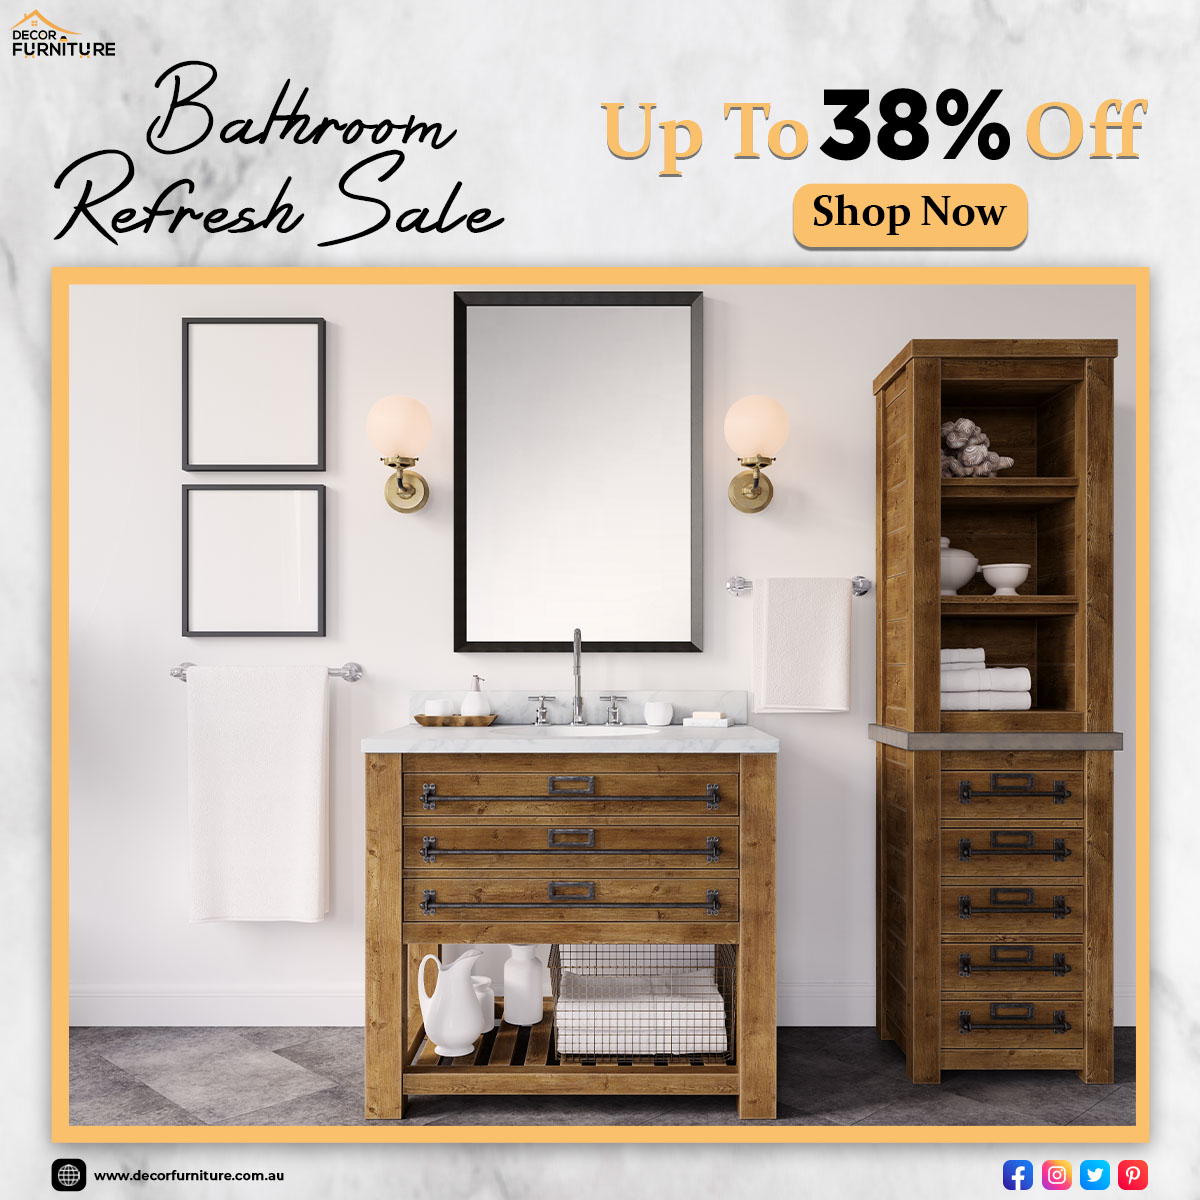 Bathroom refresh sale up to 38% off

Shop now: decorfurniture.com.au

our selection of bathroom products for up to 38% off. Get quality products at an unbeatable price and have your bathroom looking better than ever. Hurry, the sale ends soon!

#Bathroomfurniture #Decor